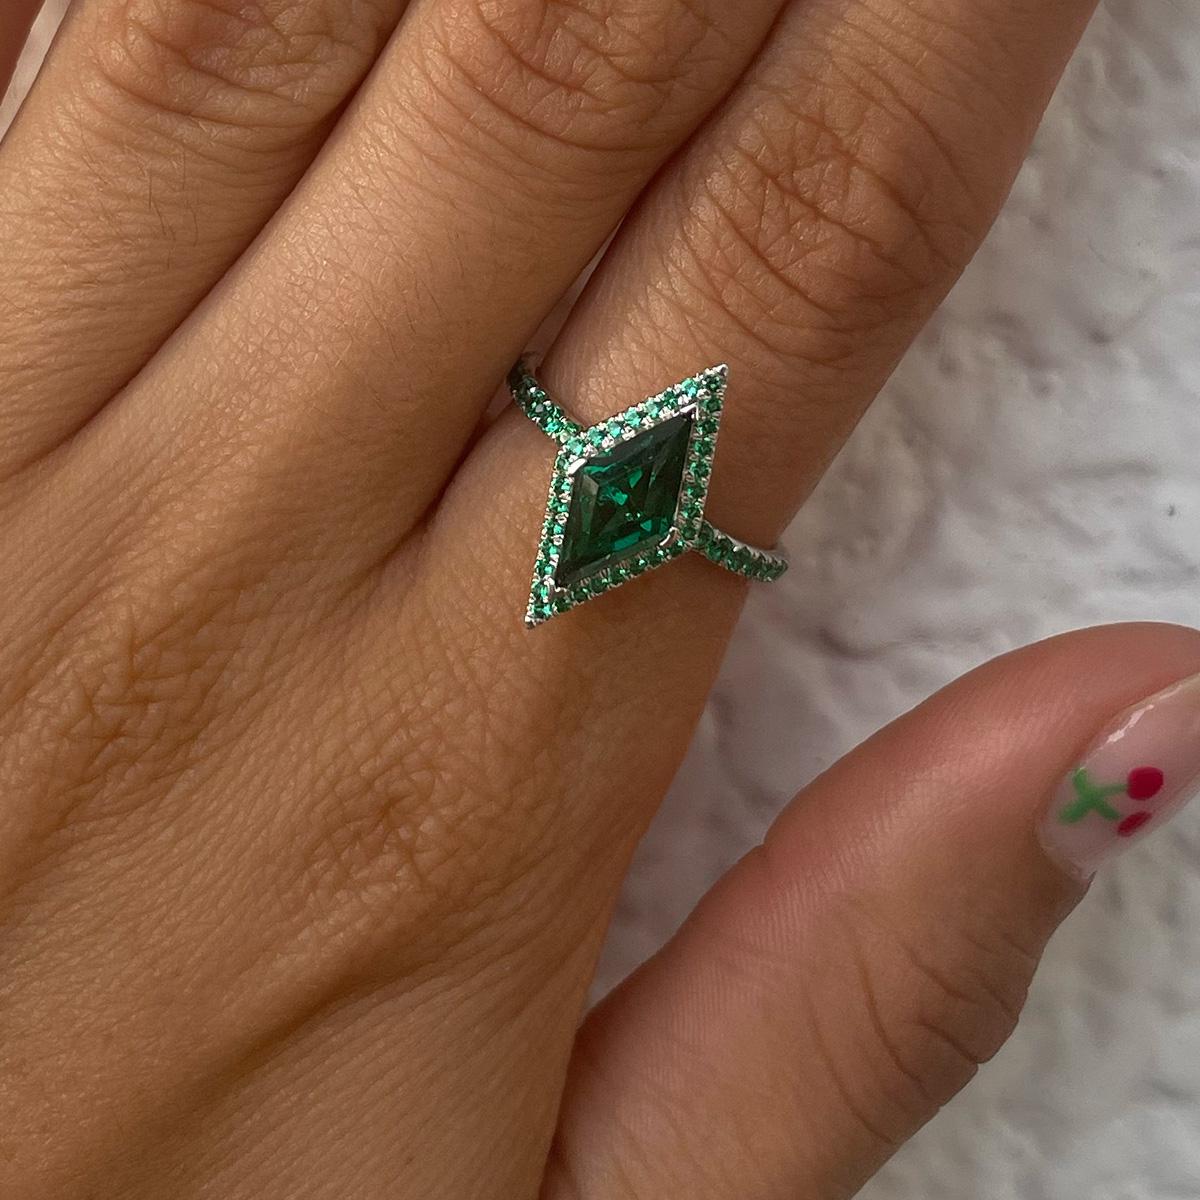 For Sale:  1.50 Carat Emerald Lozenge Ring, Green, Round Emerald Pave, 14kt White Gold 5